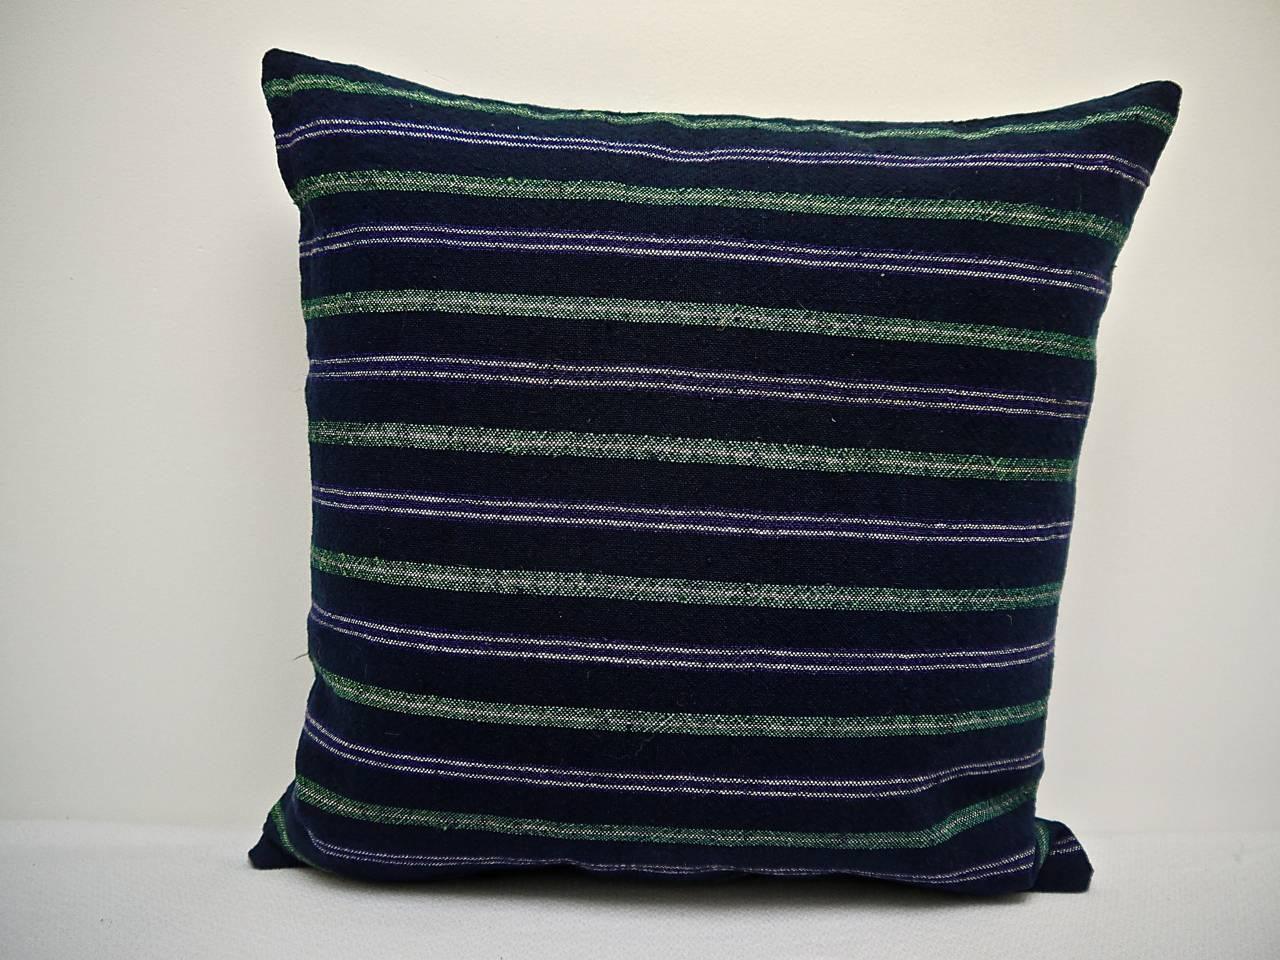 French 19th century woven cotton and wool striped square cushion. Dark indigo with white, green and purple colors in a pleasing combination. Backed in a natural indigo hand-dyed 19th century French linen. Slip-stitched closed with a duck feather